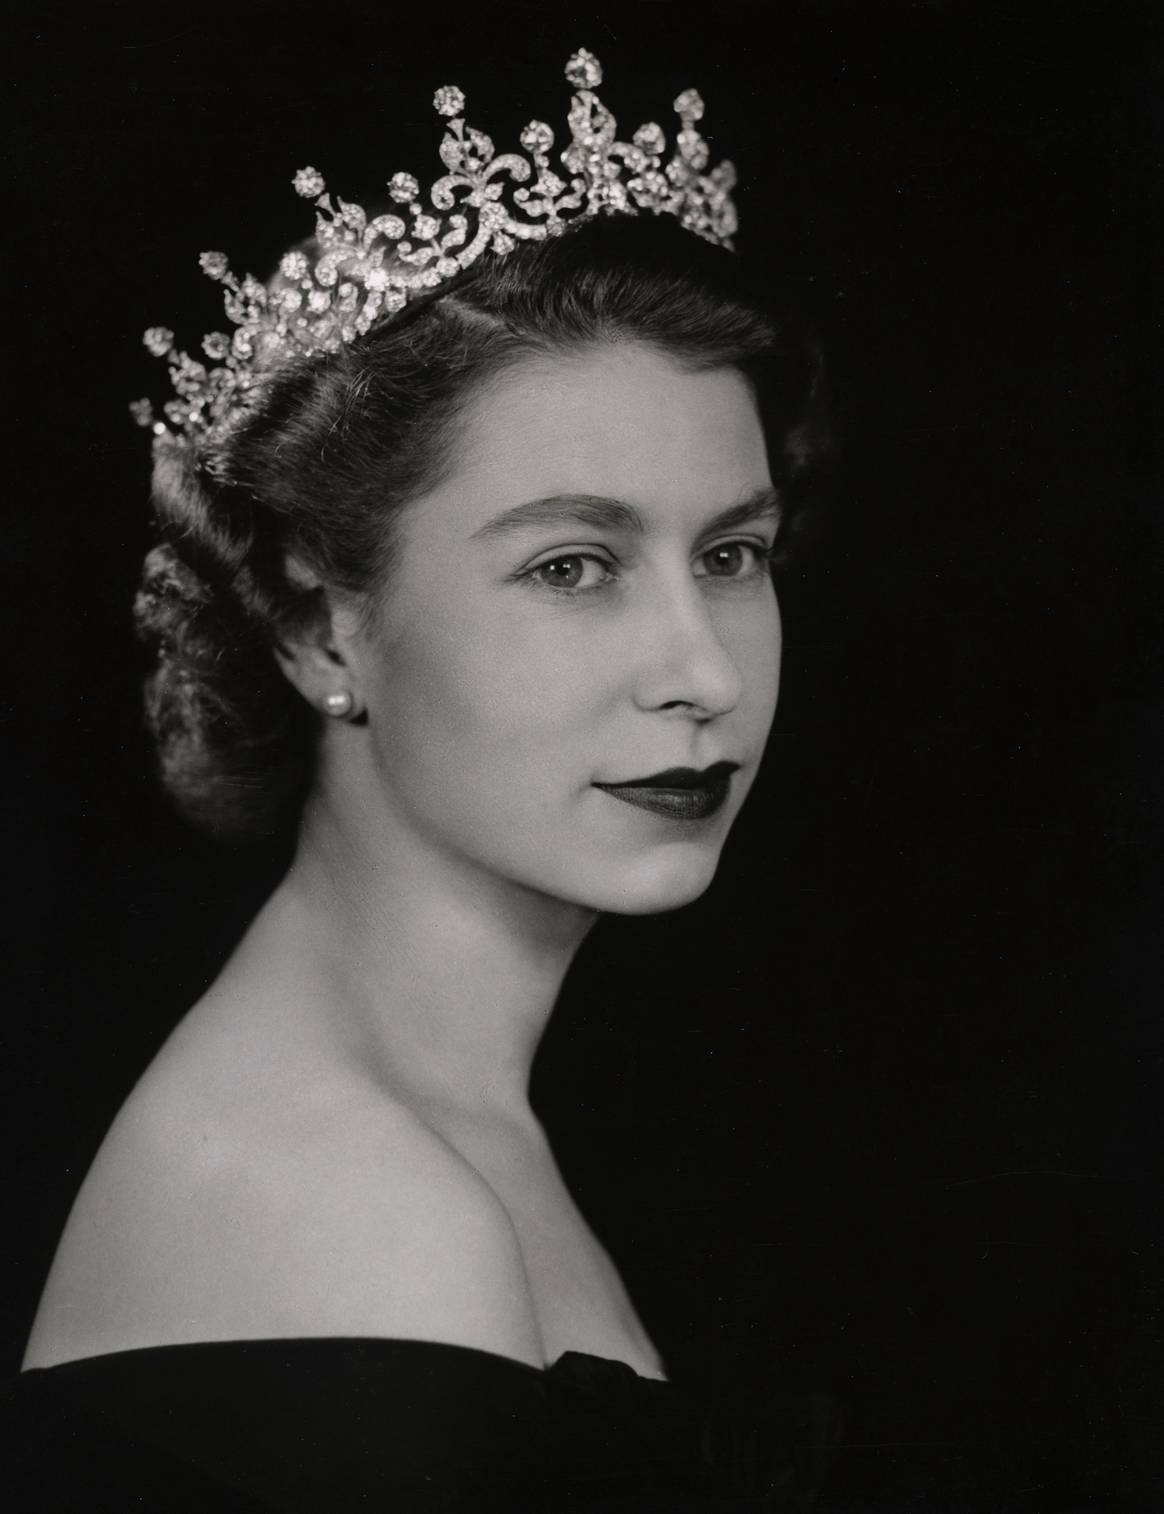 Image: courtesy of the Royal Collection Trust; Dorothy Wilding, HM Queen Elizabeth II, 1952